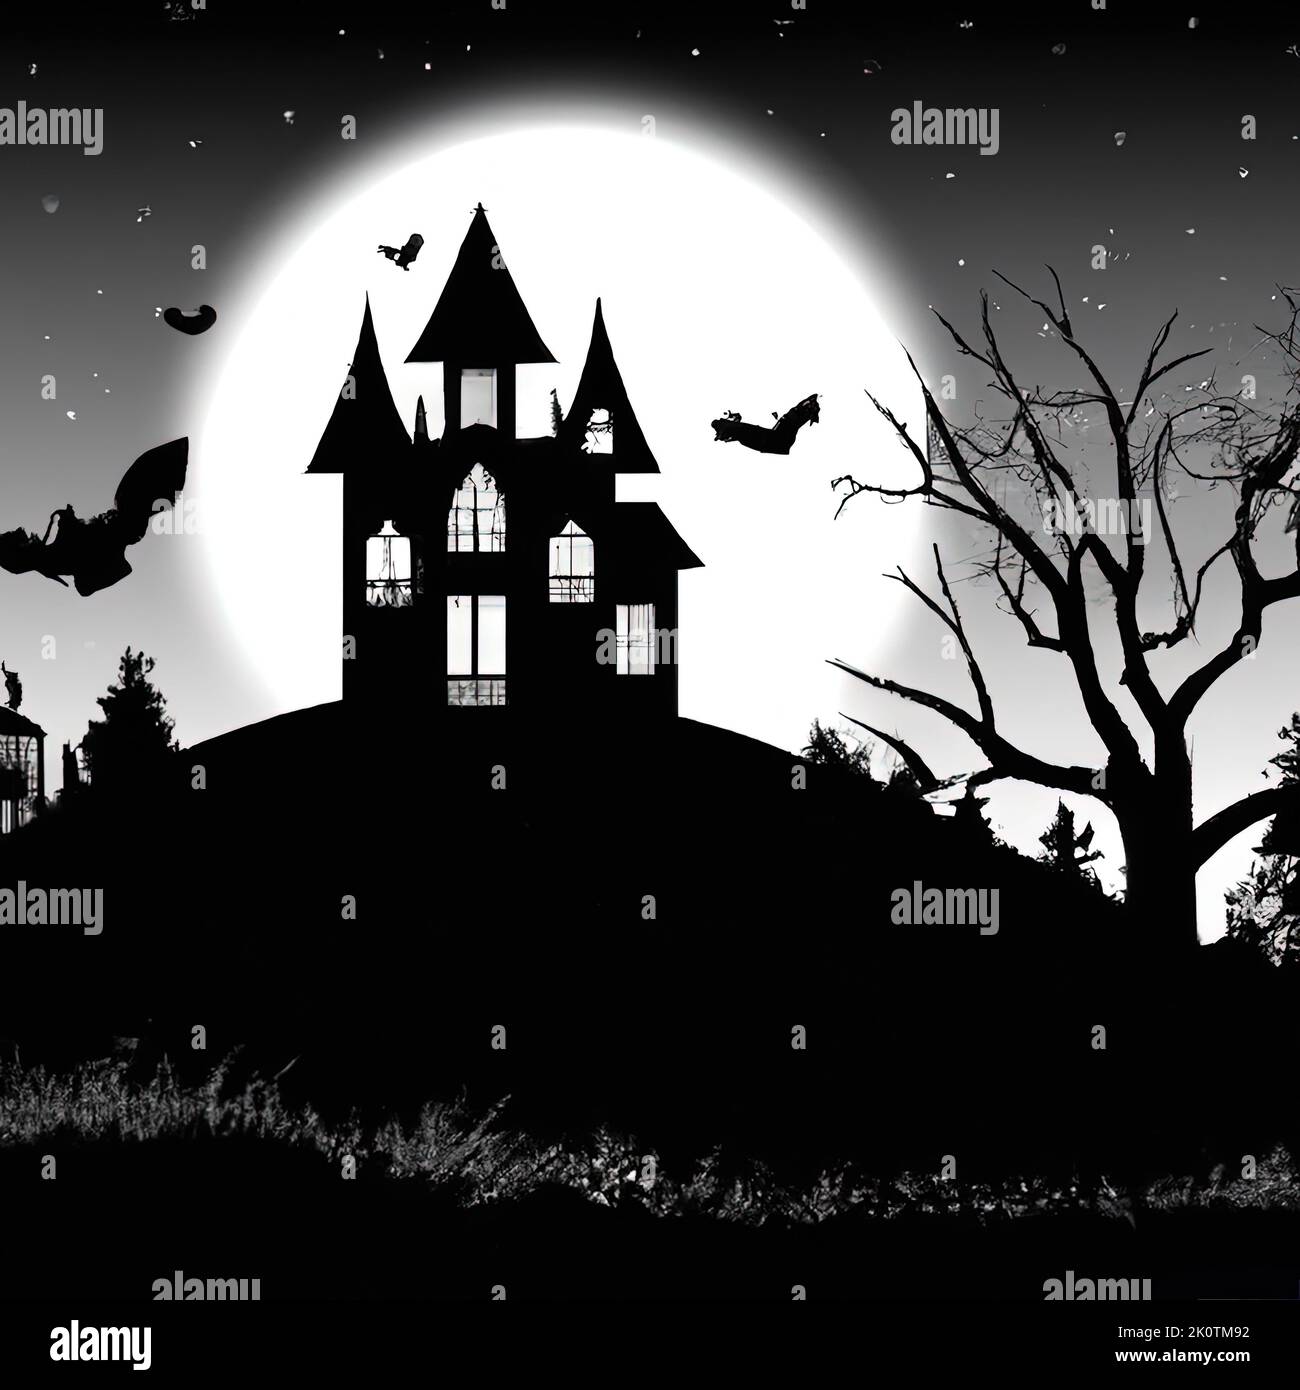 Black and white siilhouette of haunted house on hillside with creepy trees in front of full moon with flying bats. Stock Photo